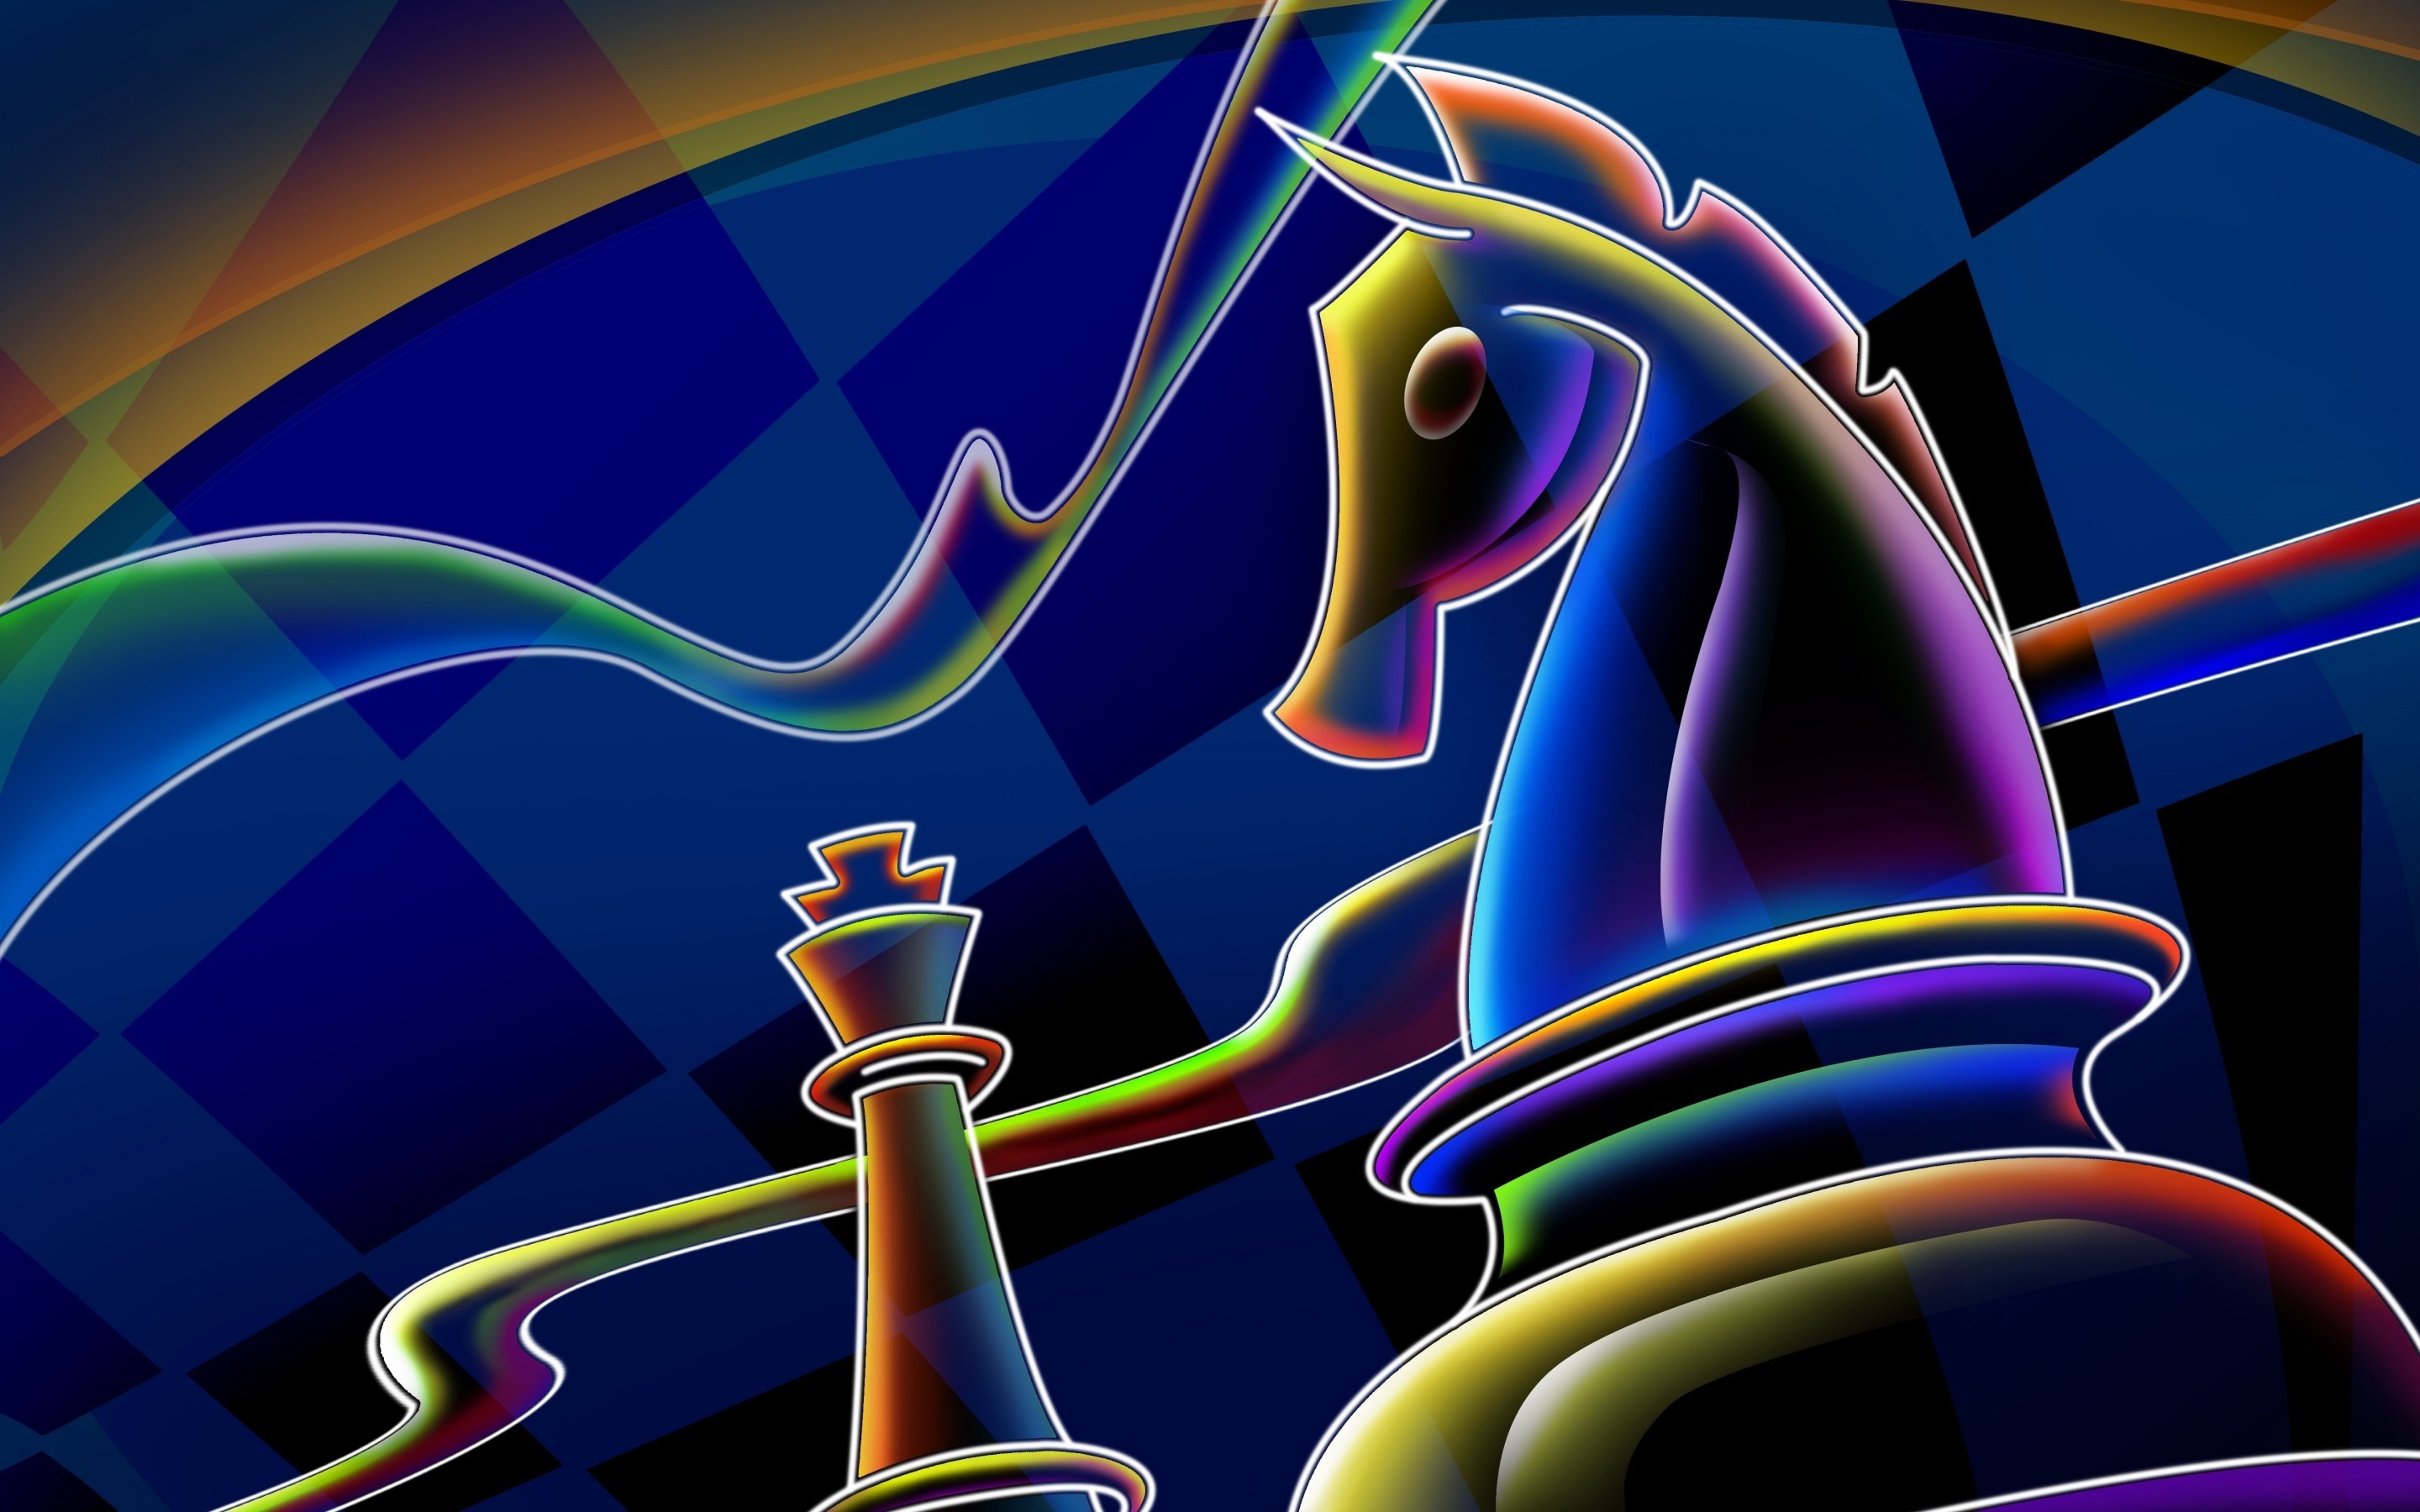 Chess Pieces Drawing for 2880 x 1800 Retina Display resolution